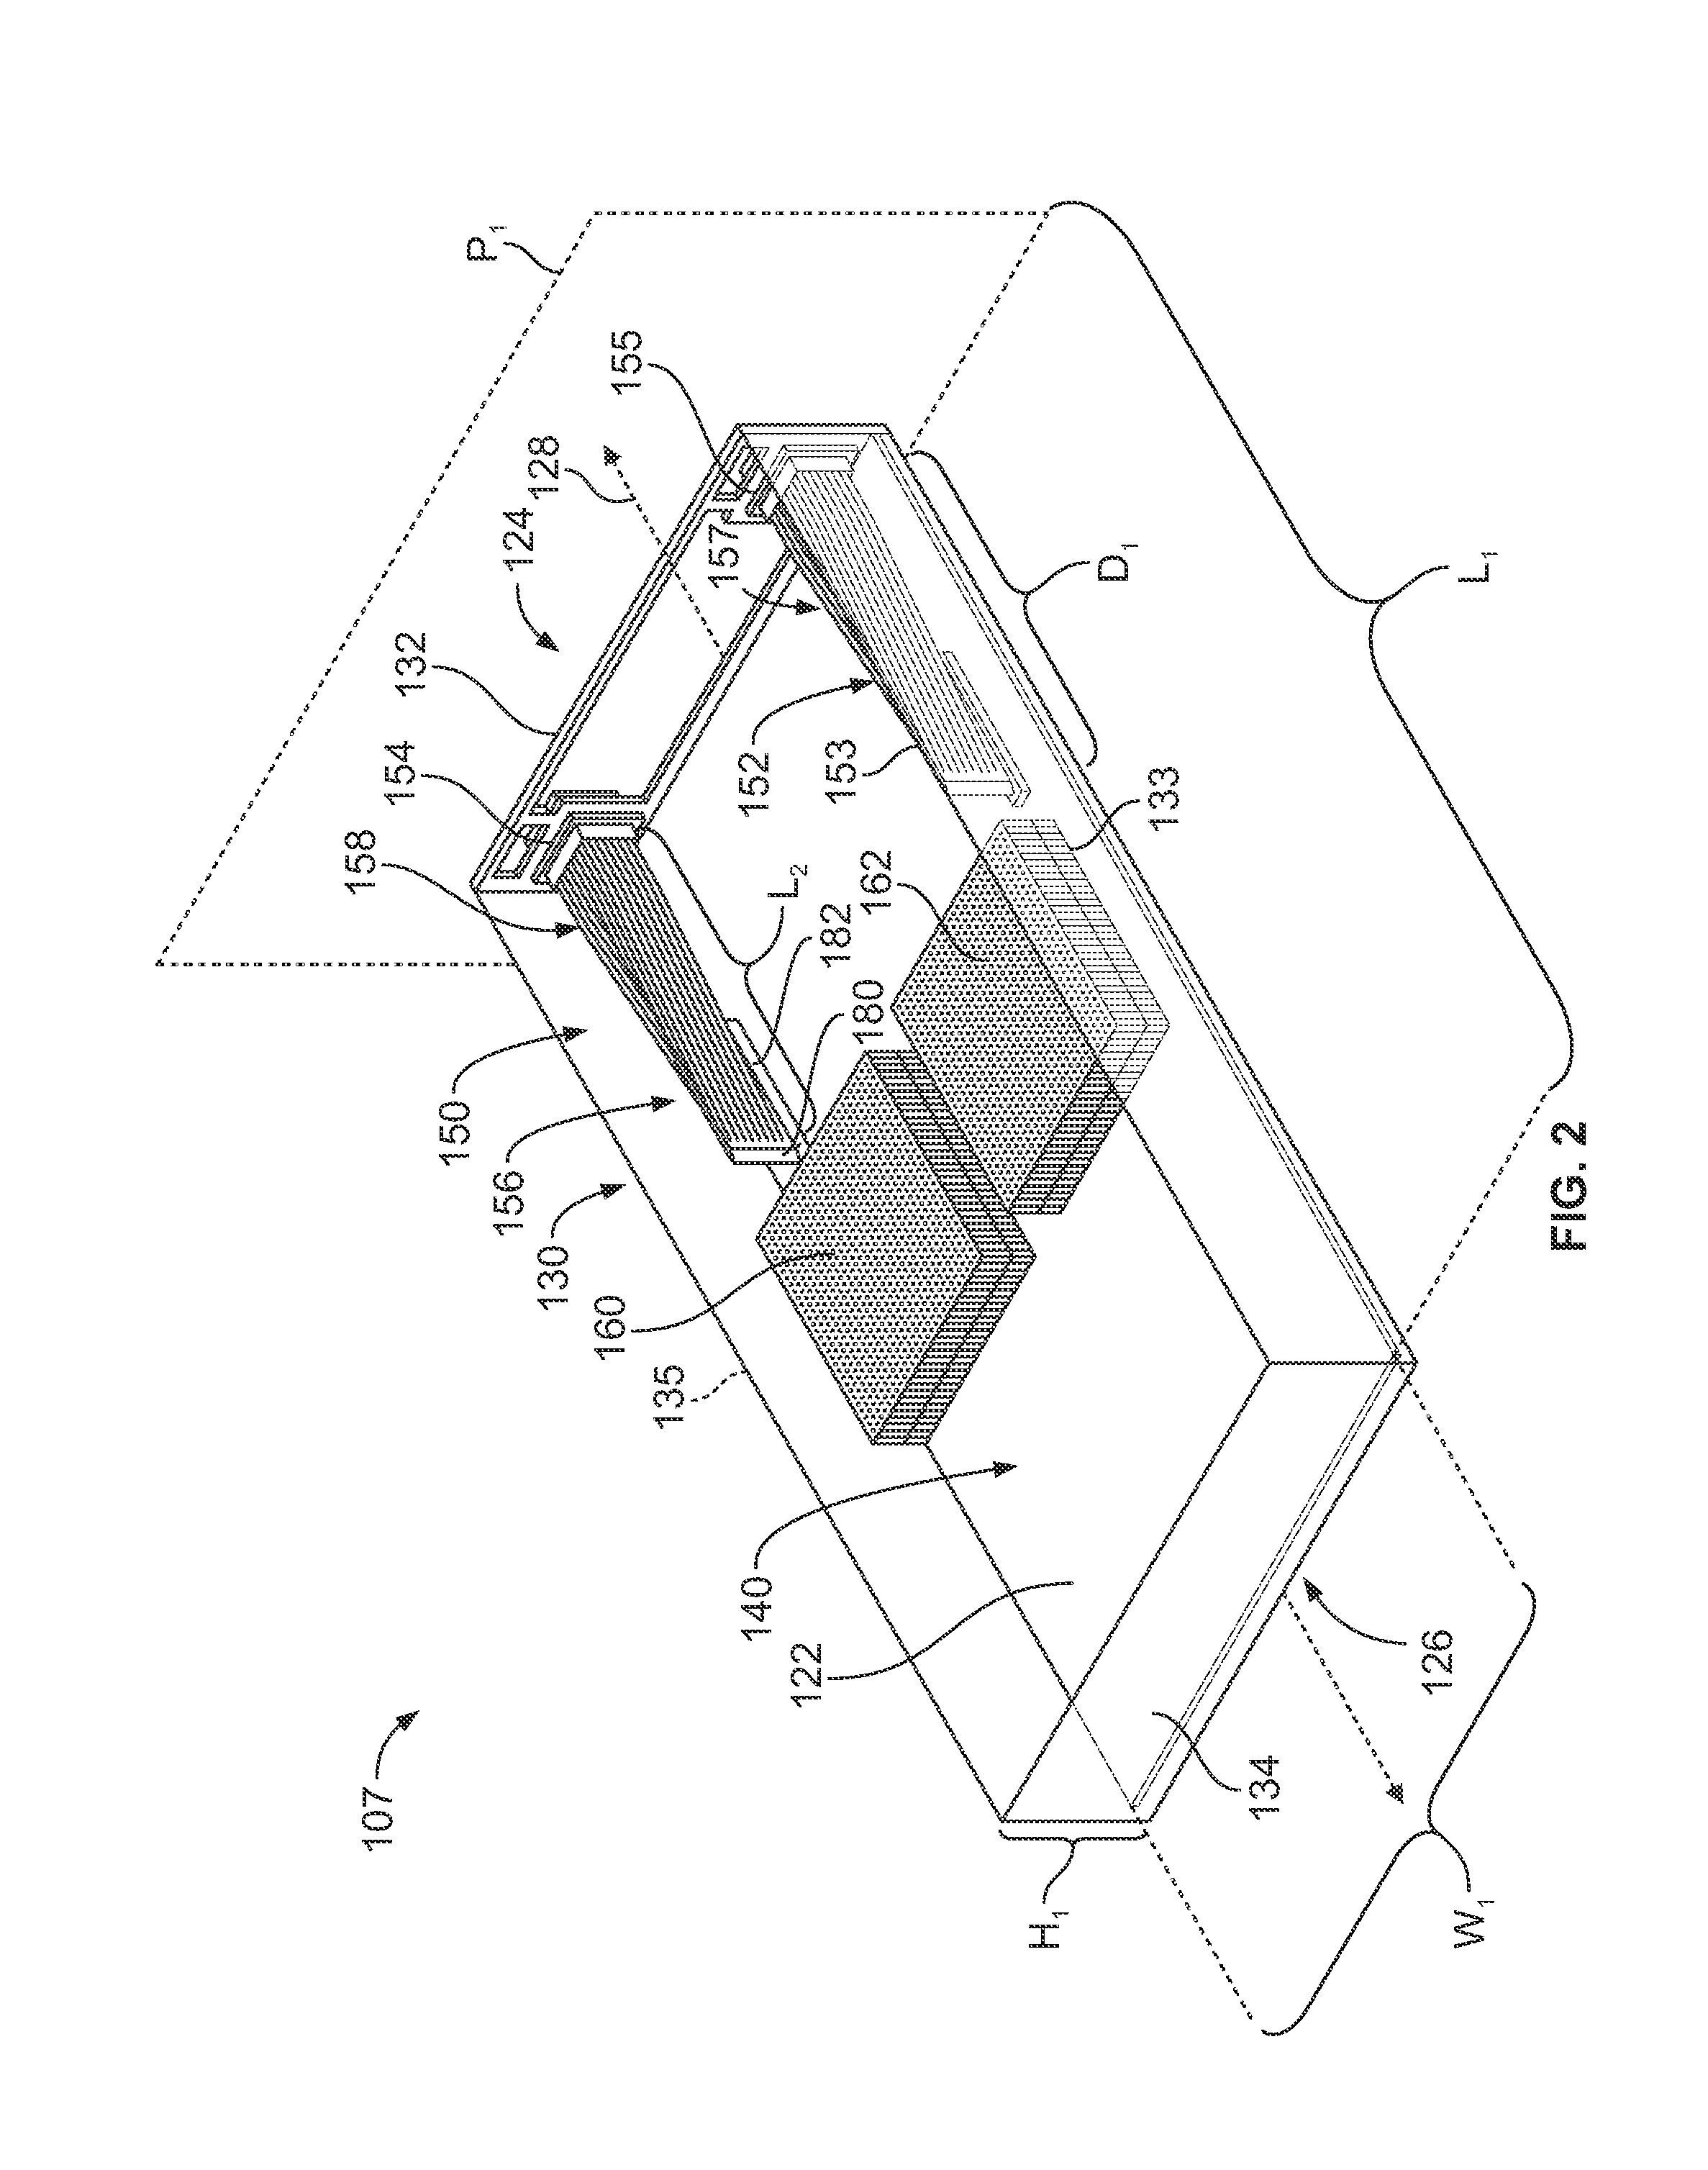 Communication modules having connectors on a leading end and systems including the same